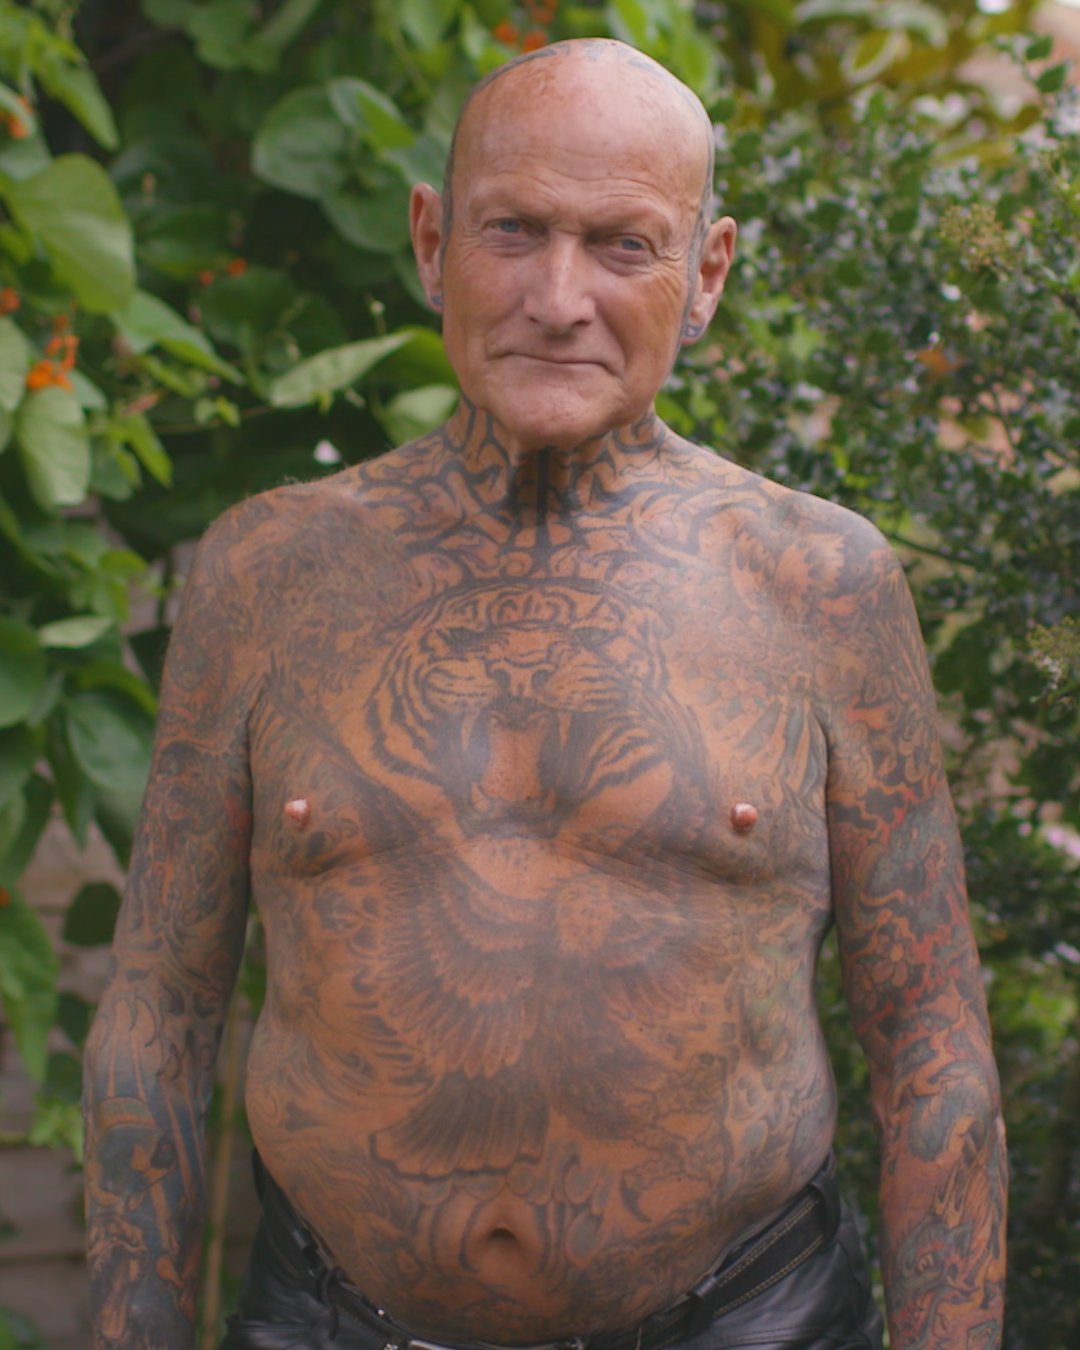 Old man tattoo Images  Search Images on Everypixel